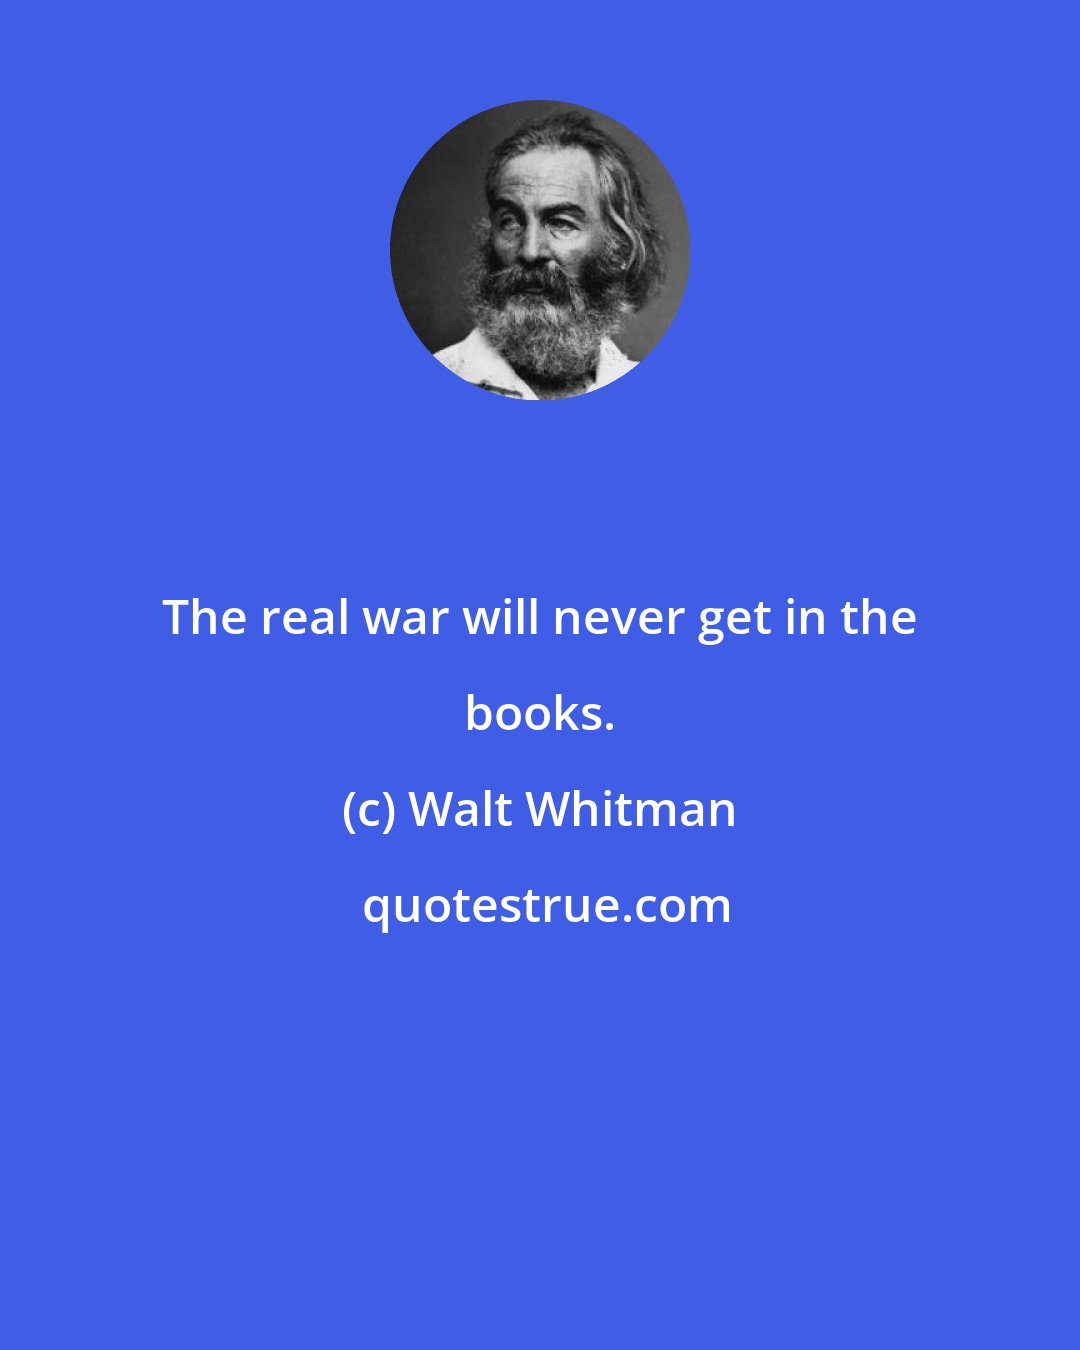 Walt Whitman: The real war will never get in the books.